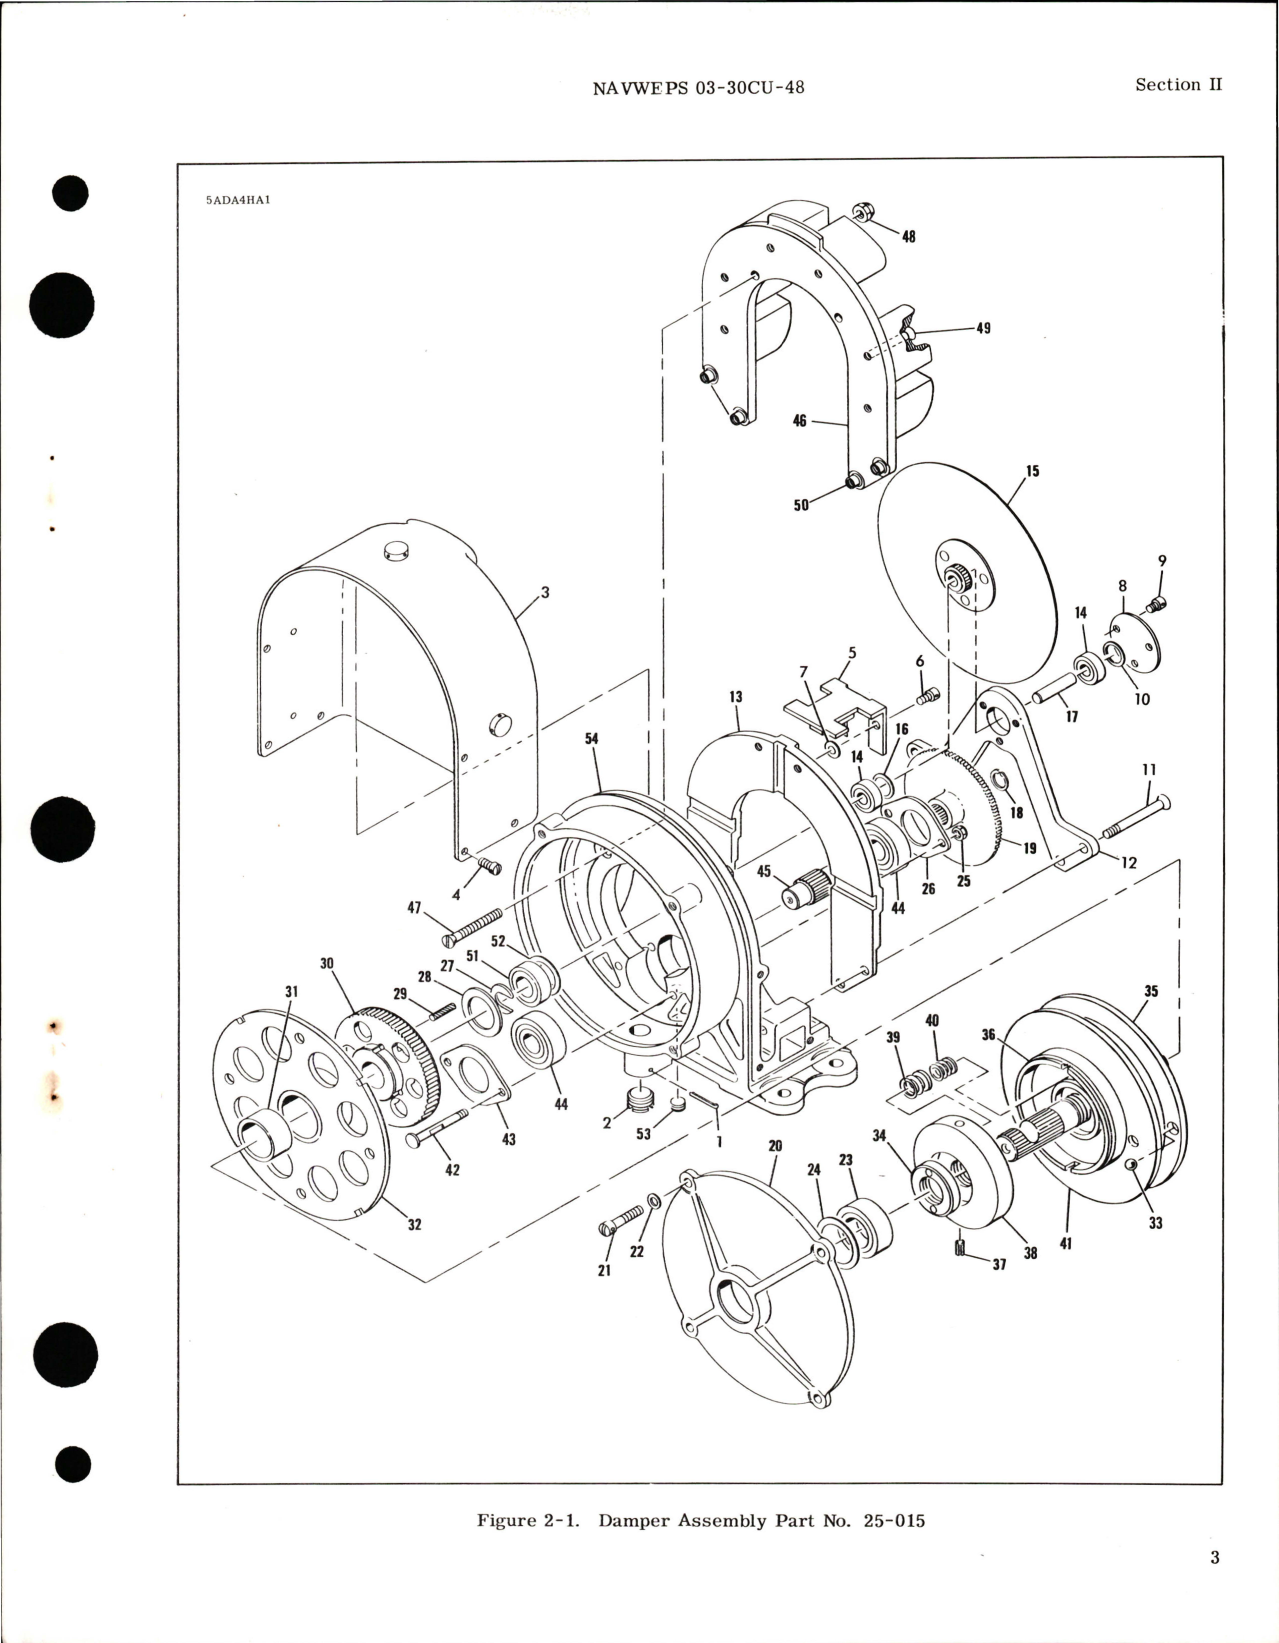 Sample page 7 from AirCorps Library document: Overhaul Instructions for Damper Assembly - Part 25-015